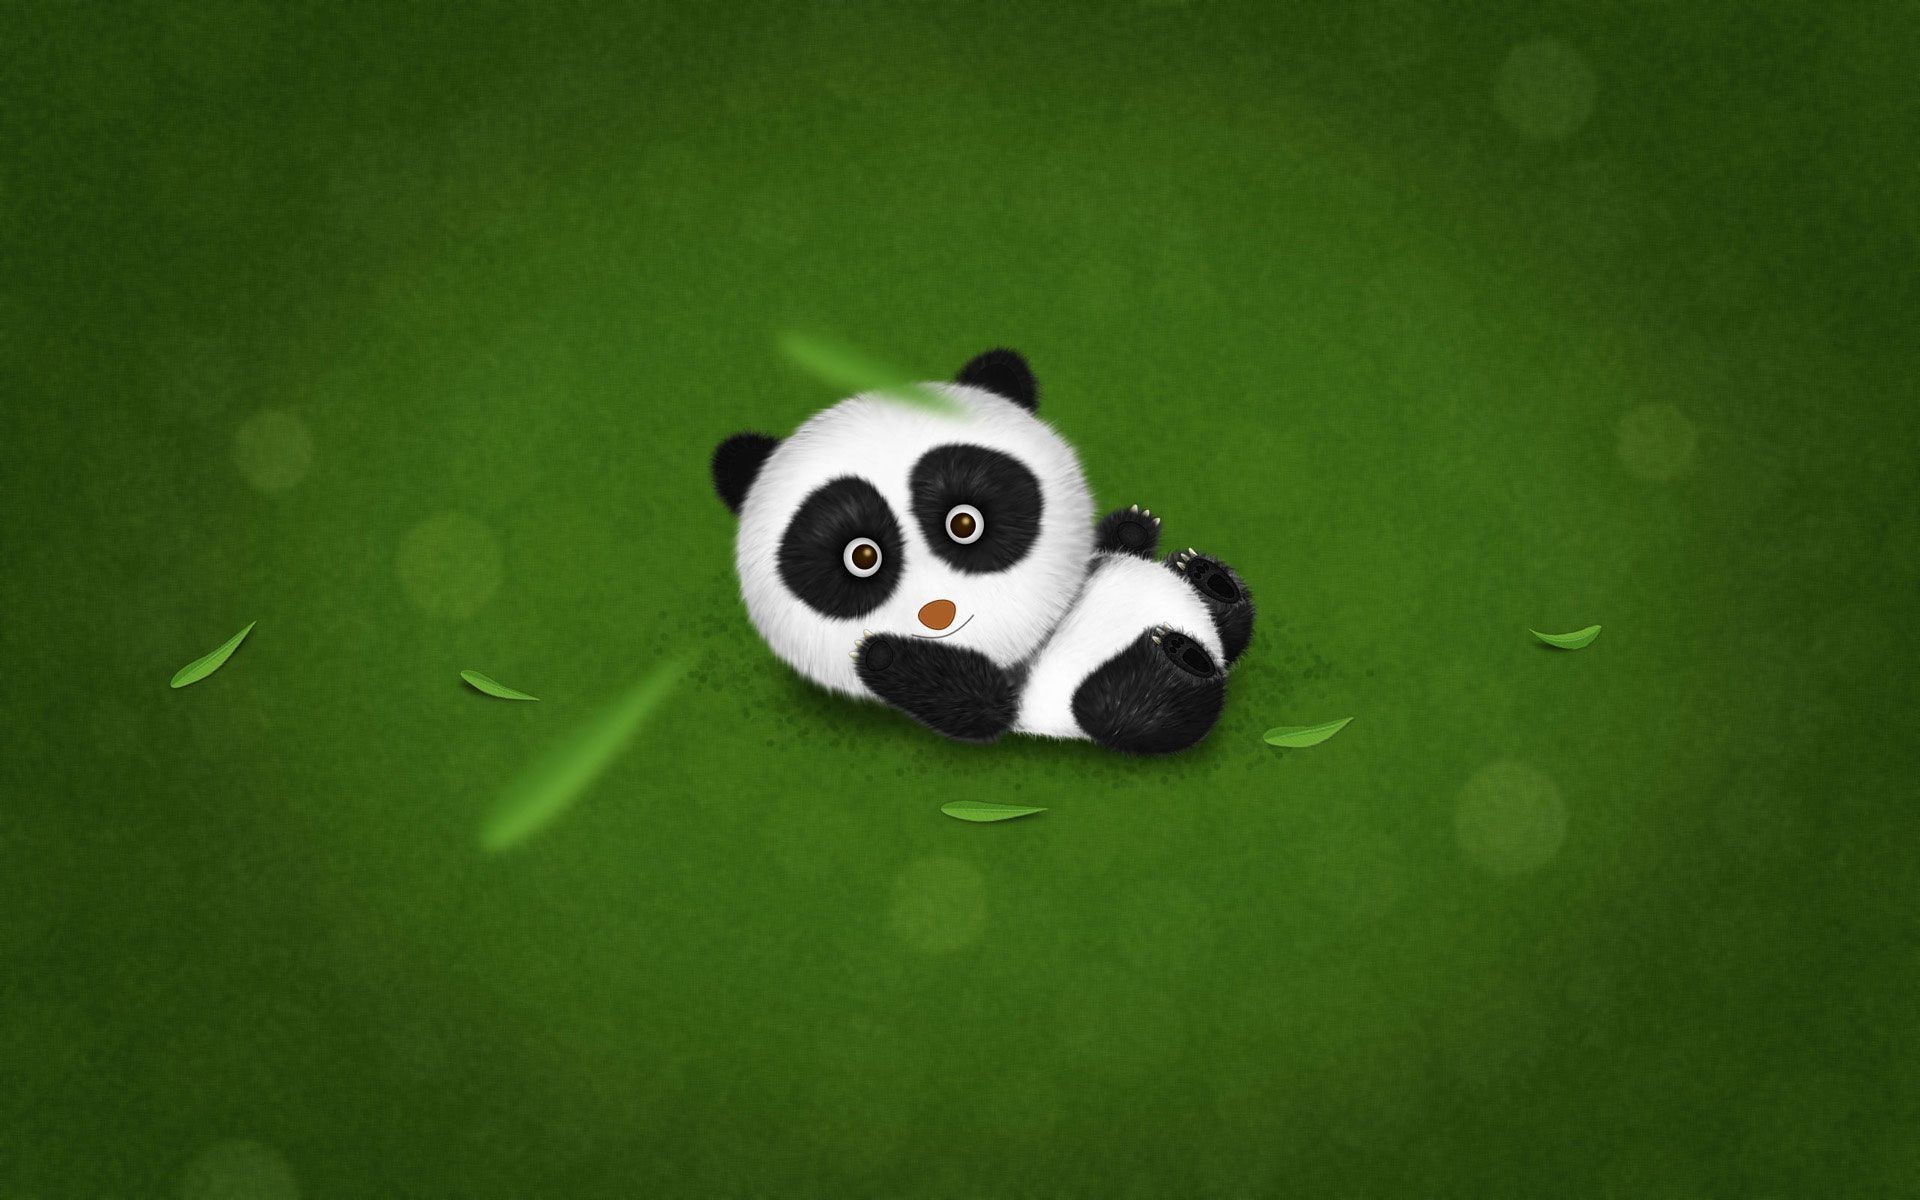 1920x1200  Cute Panda Wallpapers Android Apps on Google Play 1920Ã—1200 Panda  Images Wallpapers (